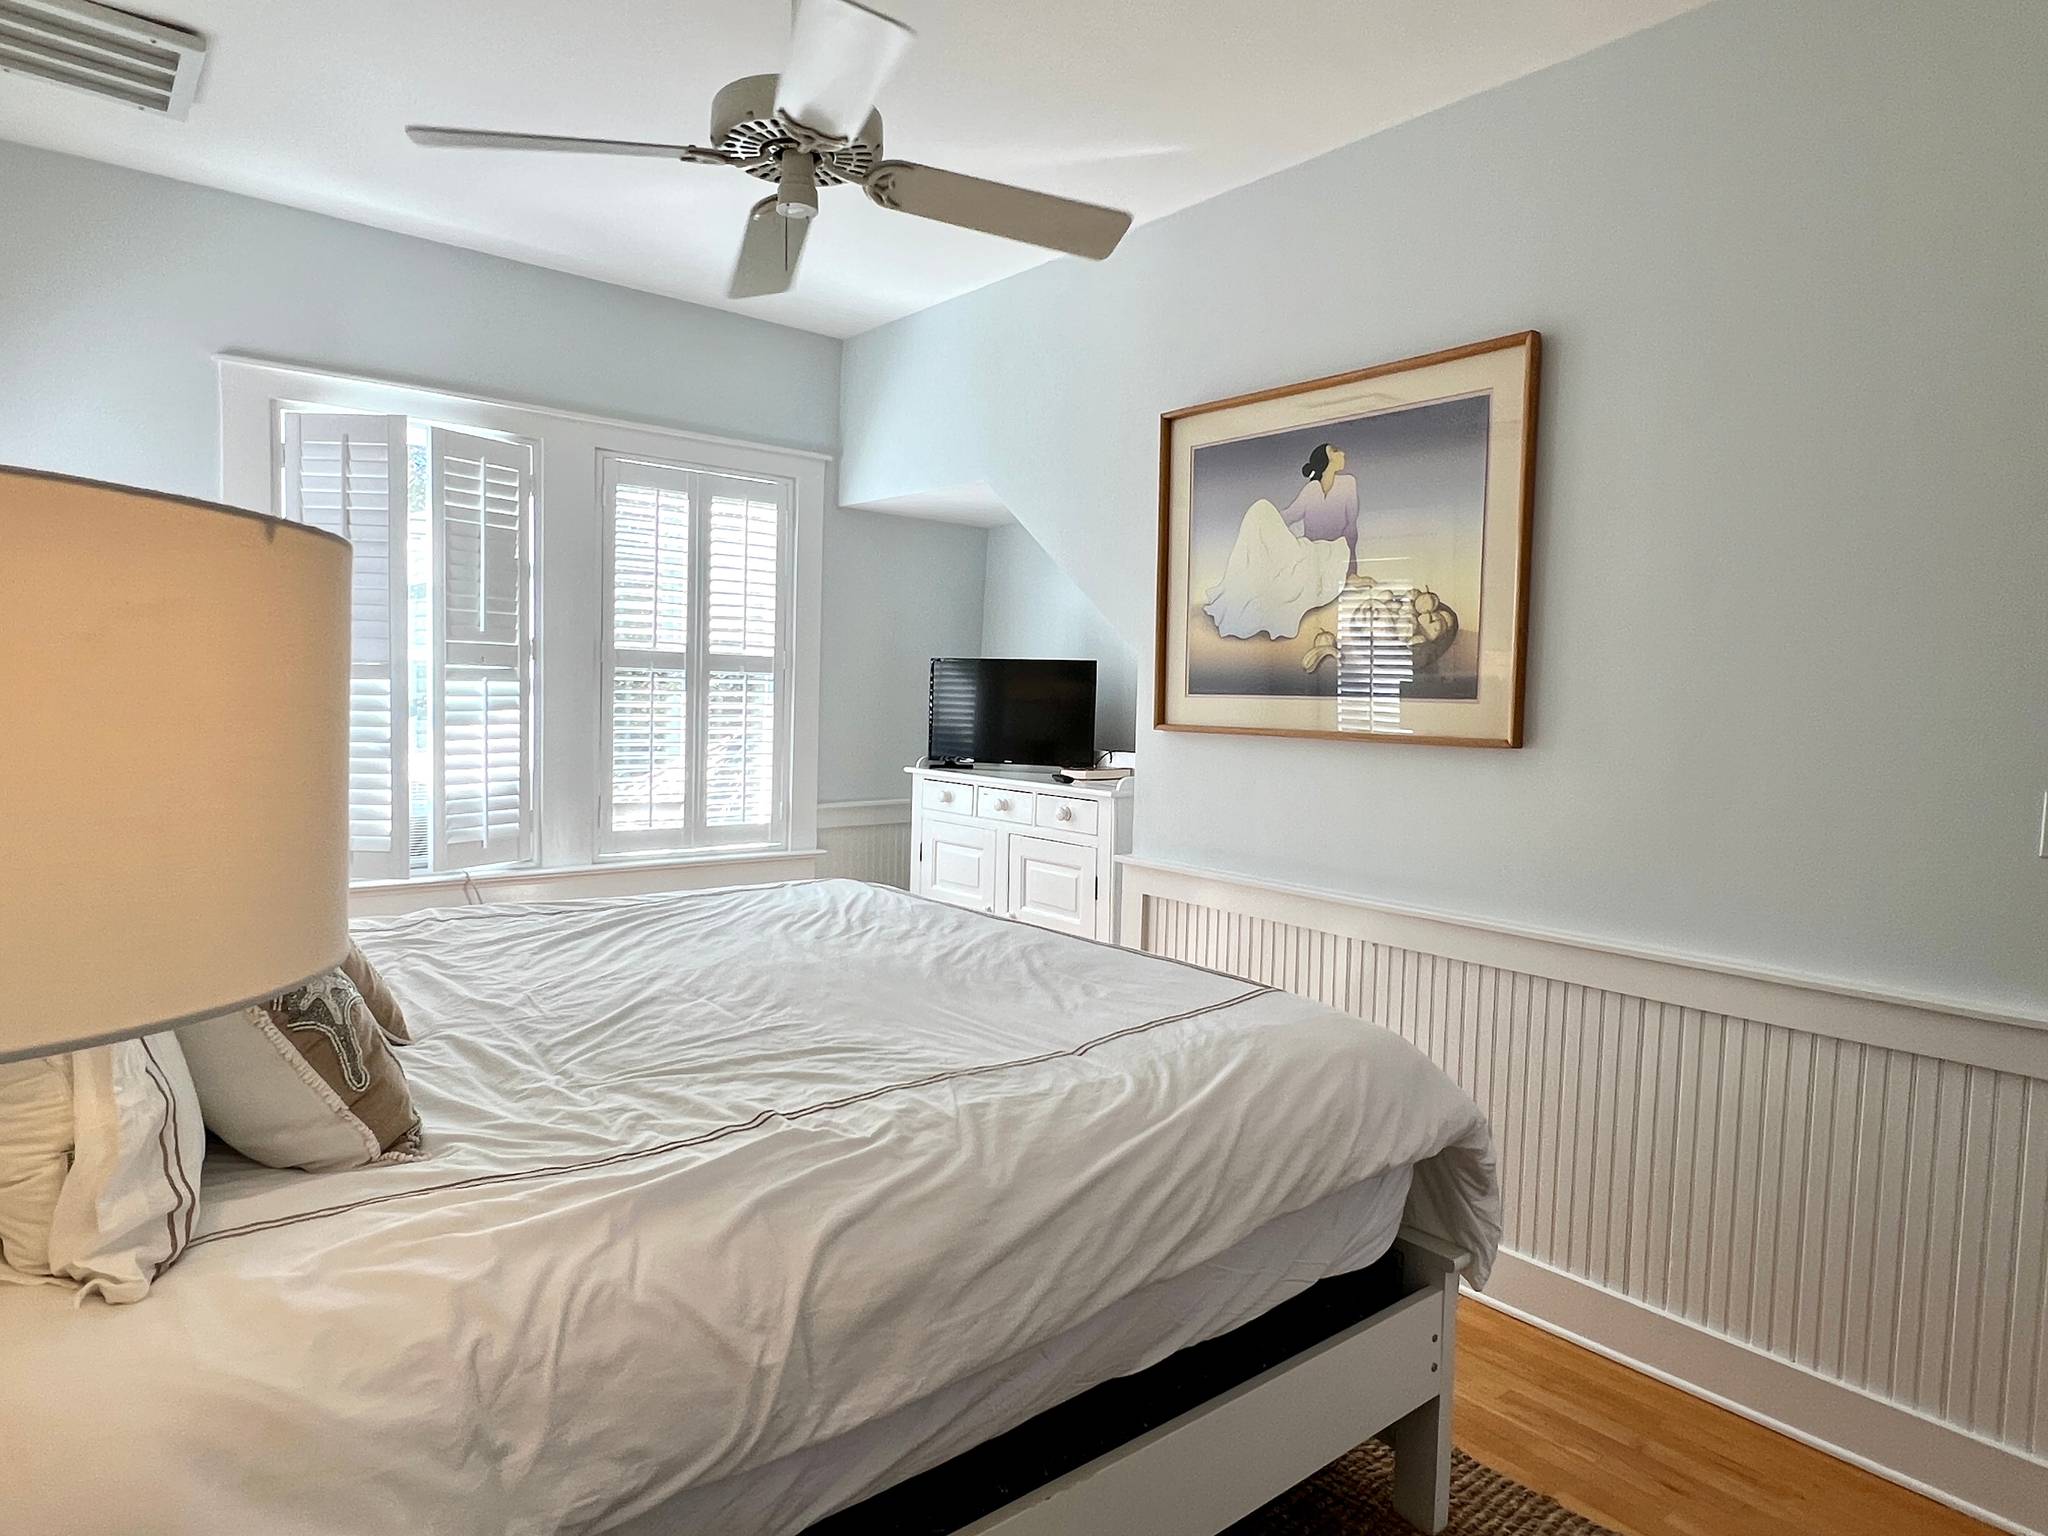 Wean Back and Wewax Cottage | Seaside, FL